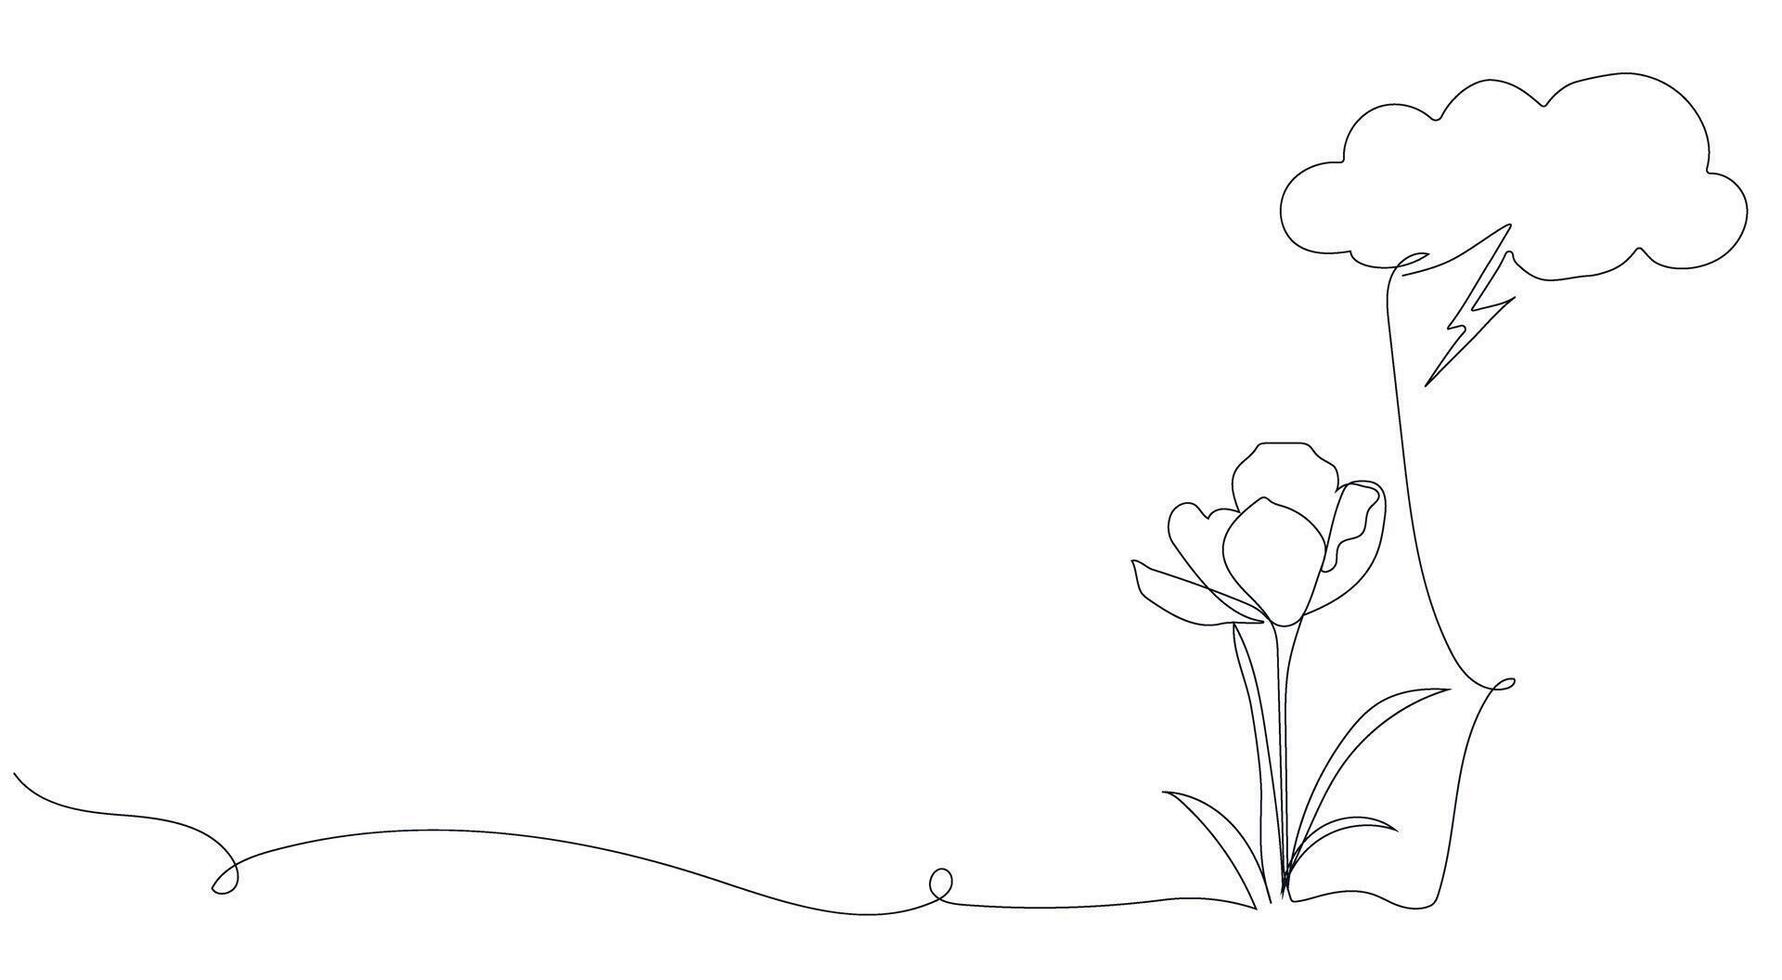 Continuous drawing of lines. Clouds with a thunderstorm over a flower. Weather conditions. Black isolated on a white background. Hand drawn illustration. vector